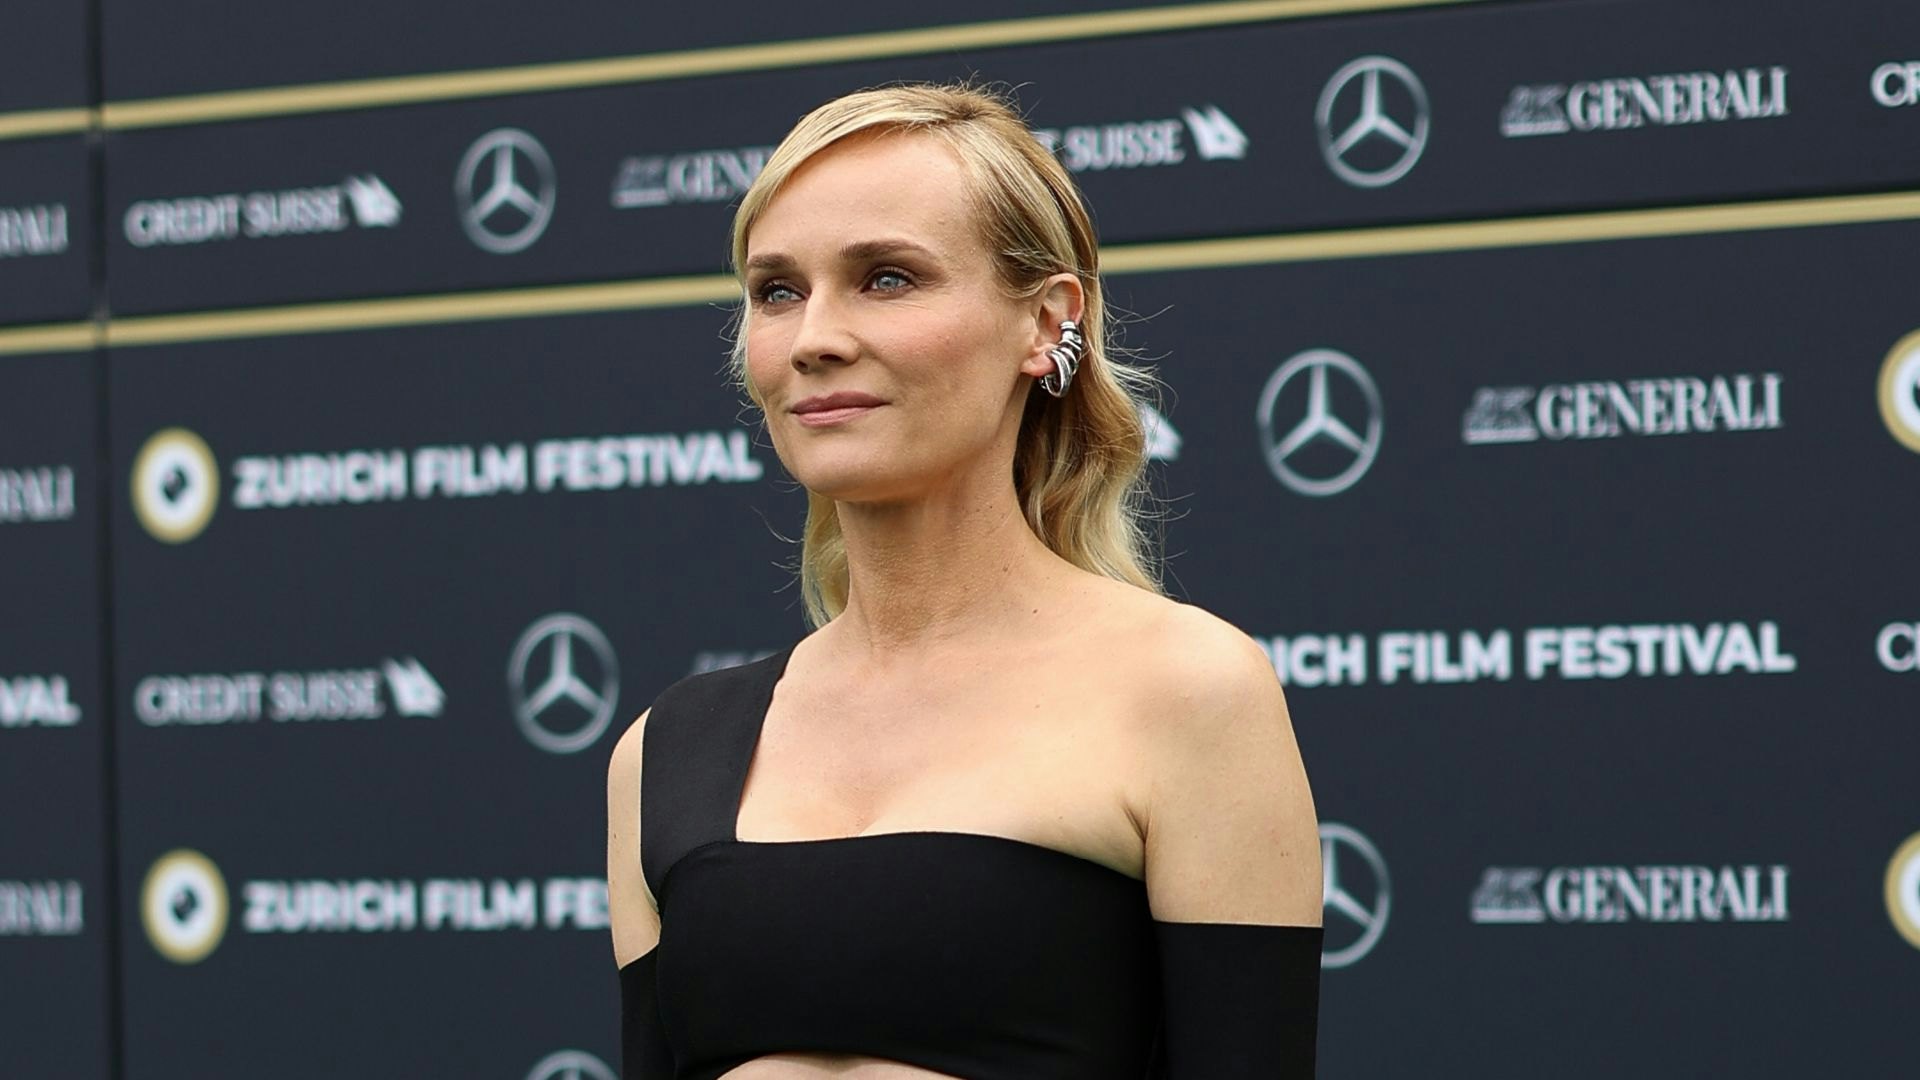 Diane Kruger was already a guest at last year's ZFF © Titin Emans